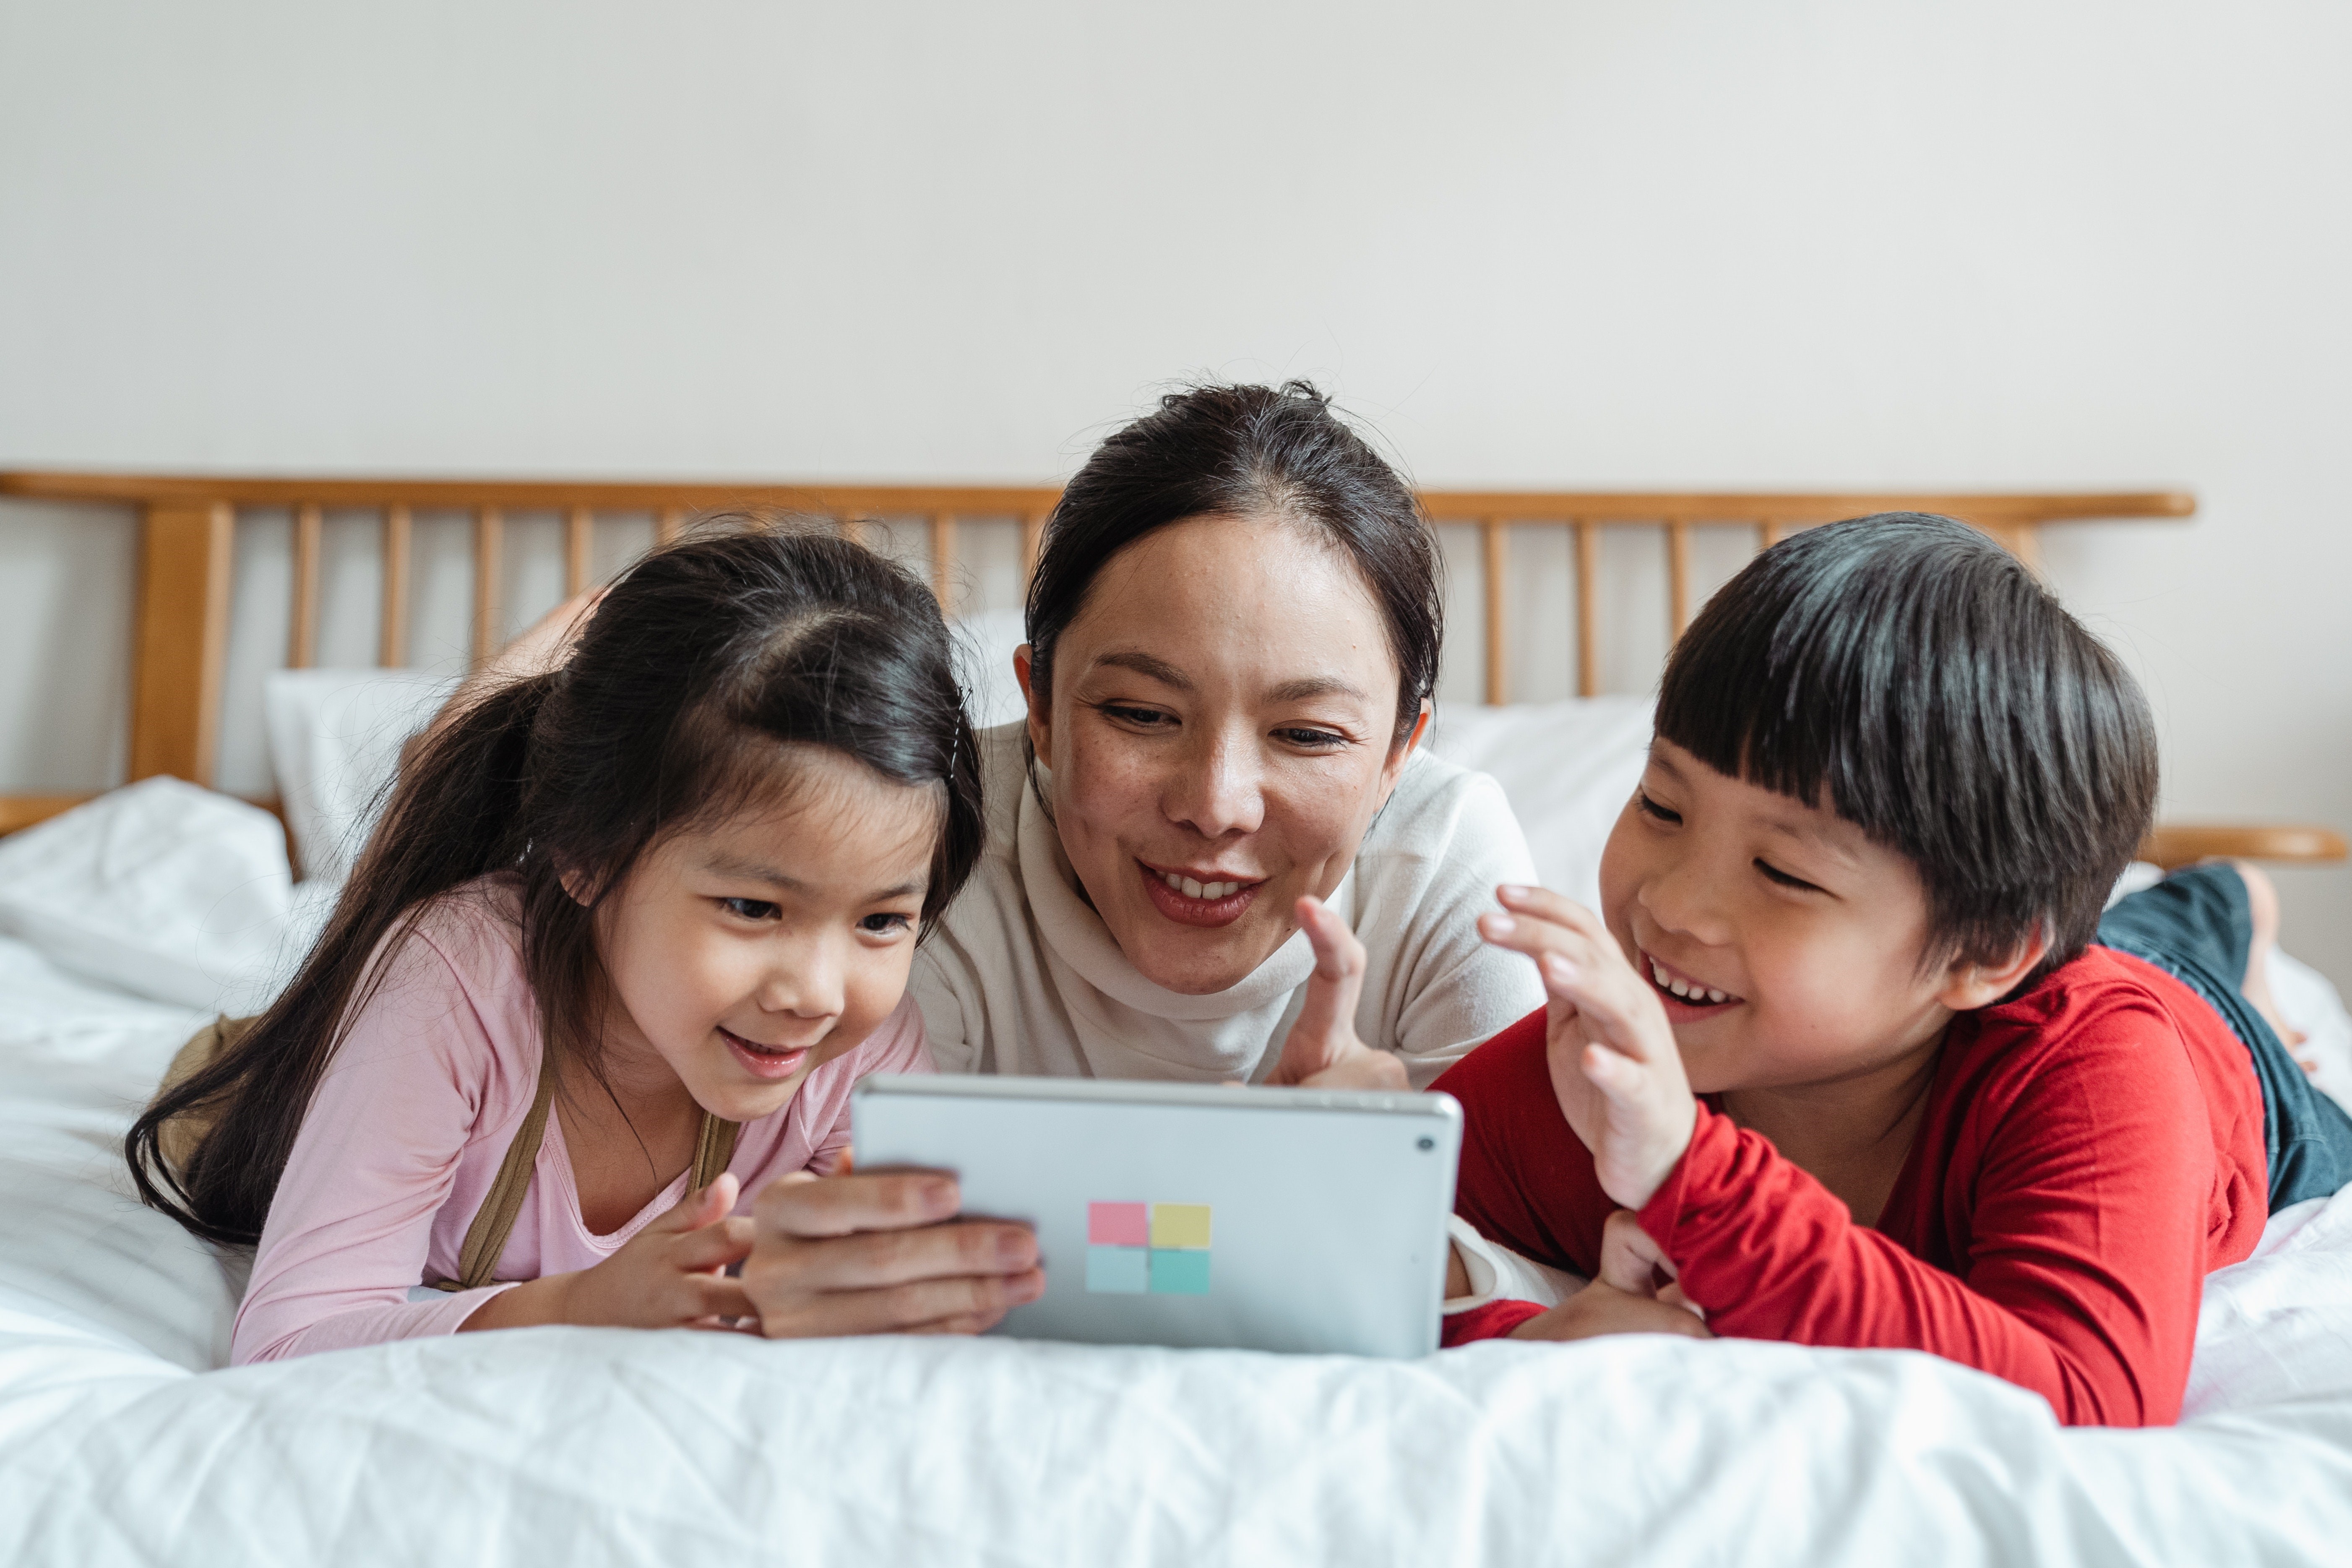 Woman and two children looking at tablet device while lying on bed